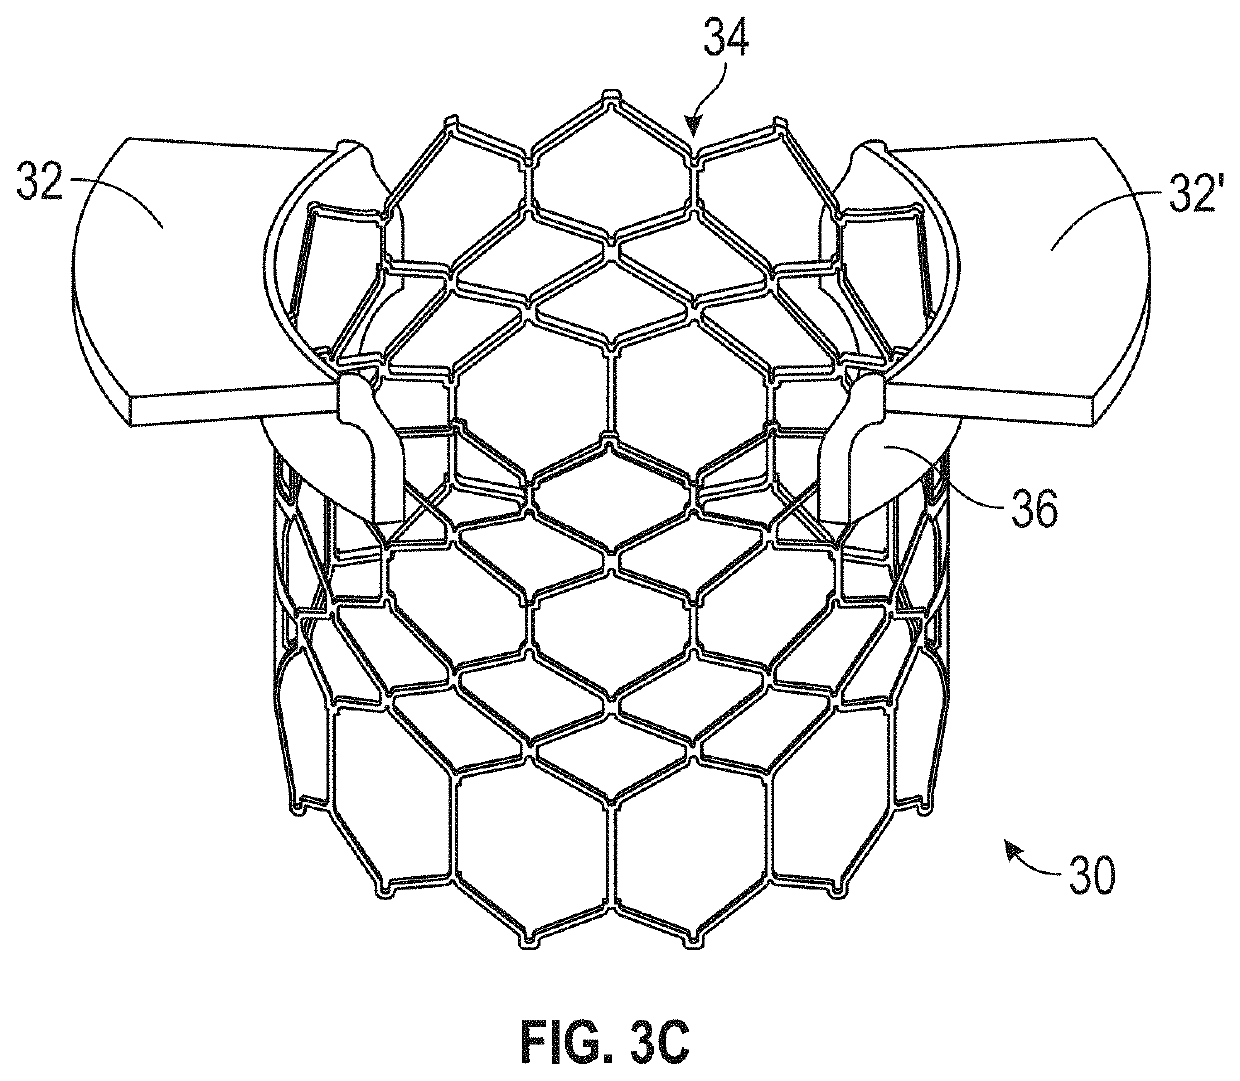 Systems, devices, and methods for treating heart valves